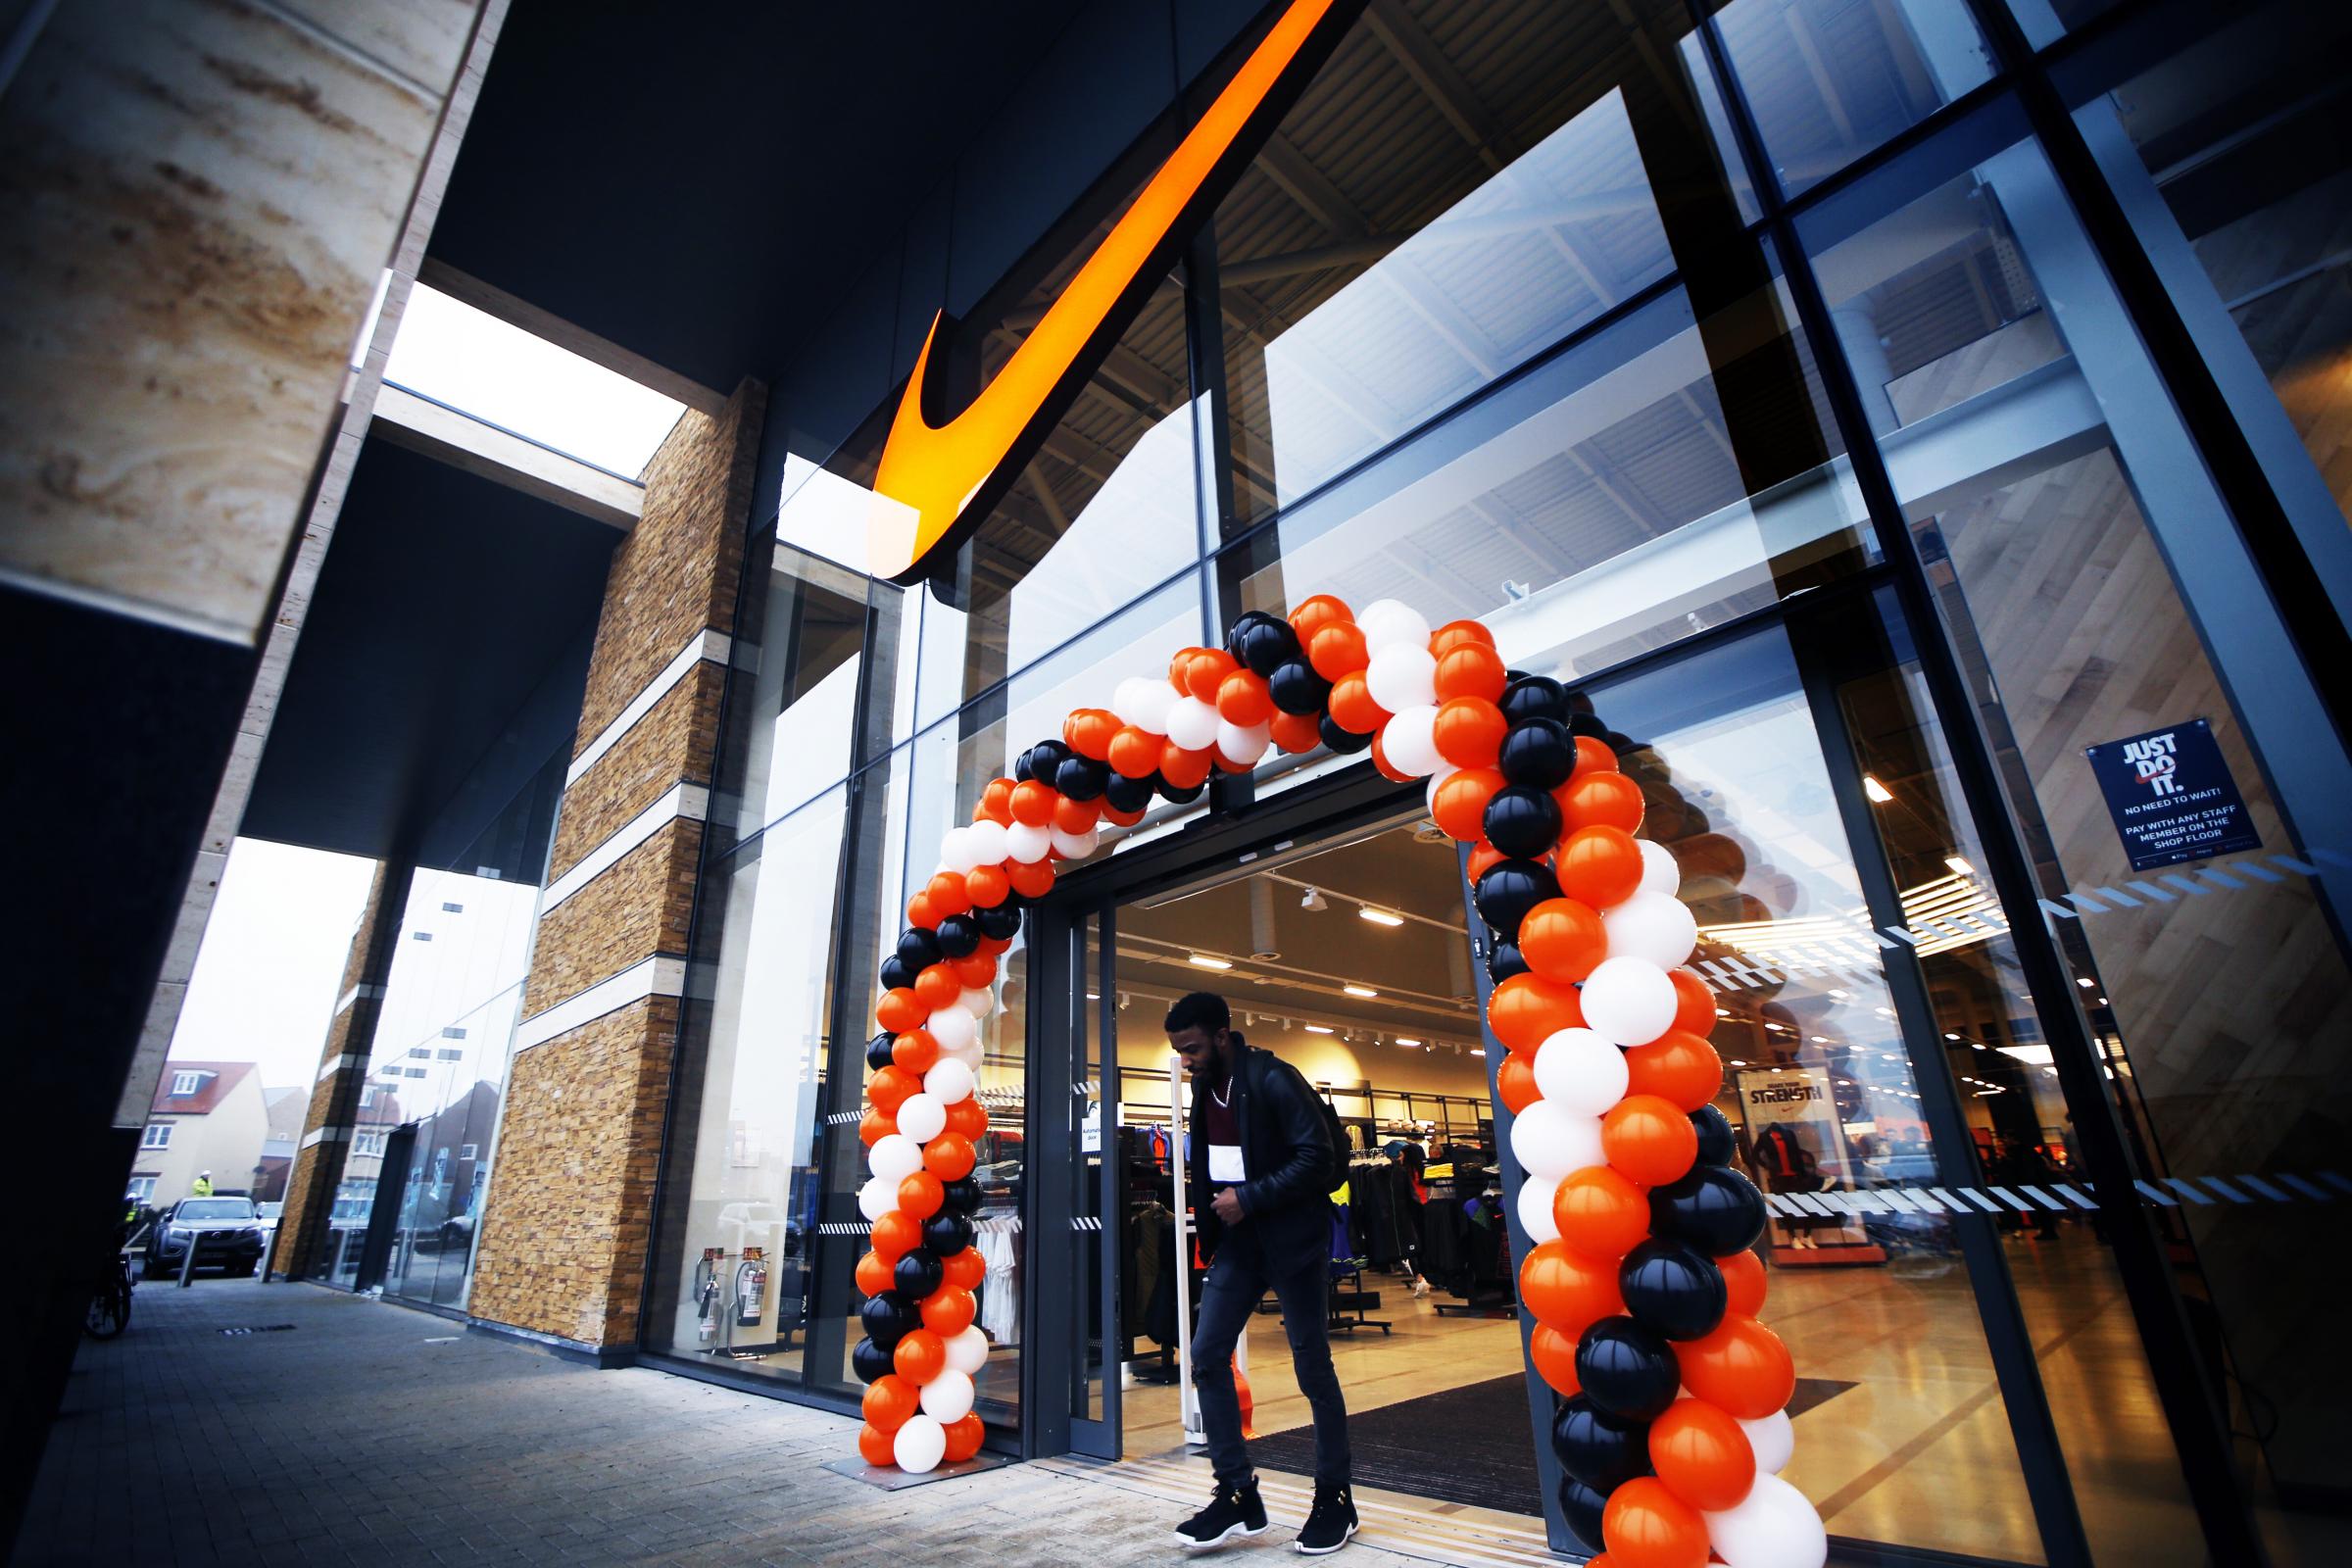 nike outlet closing